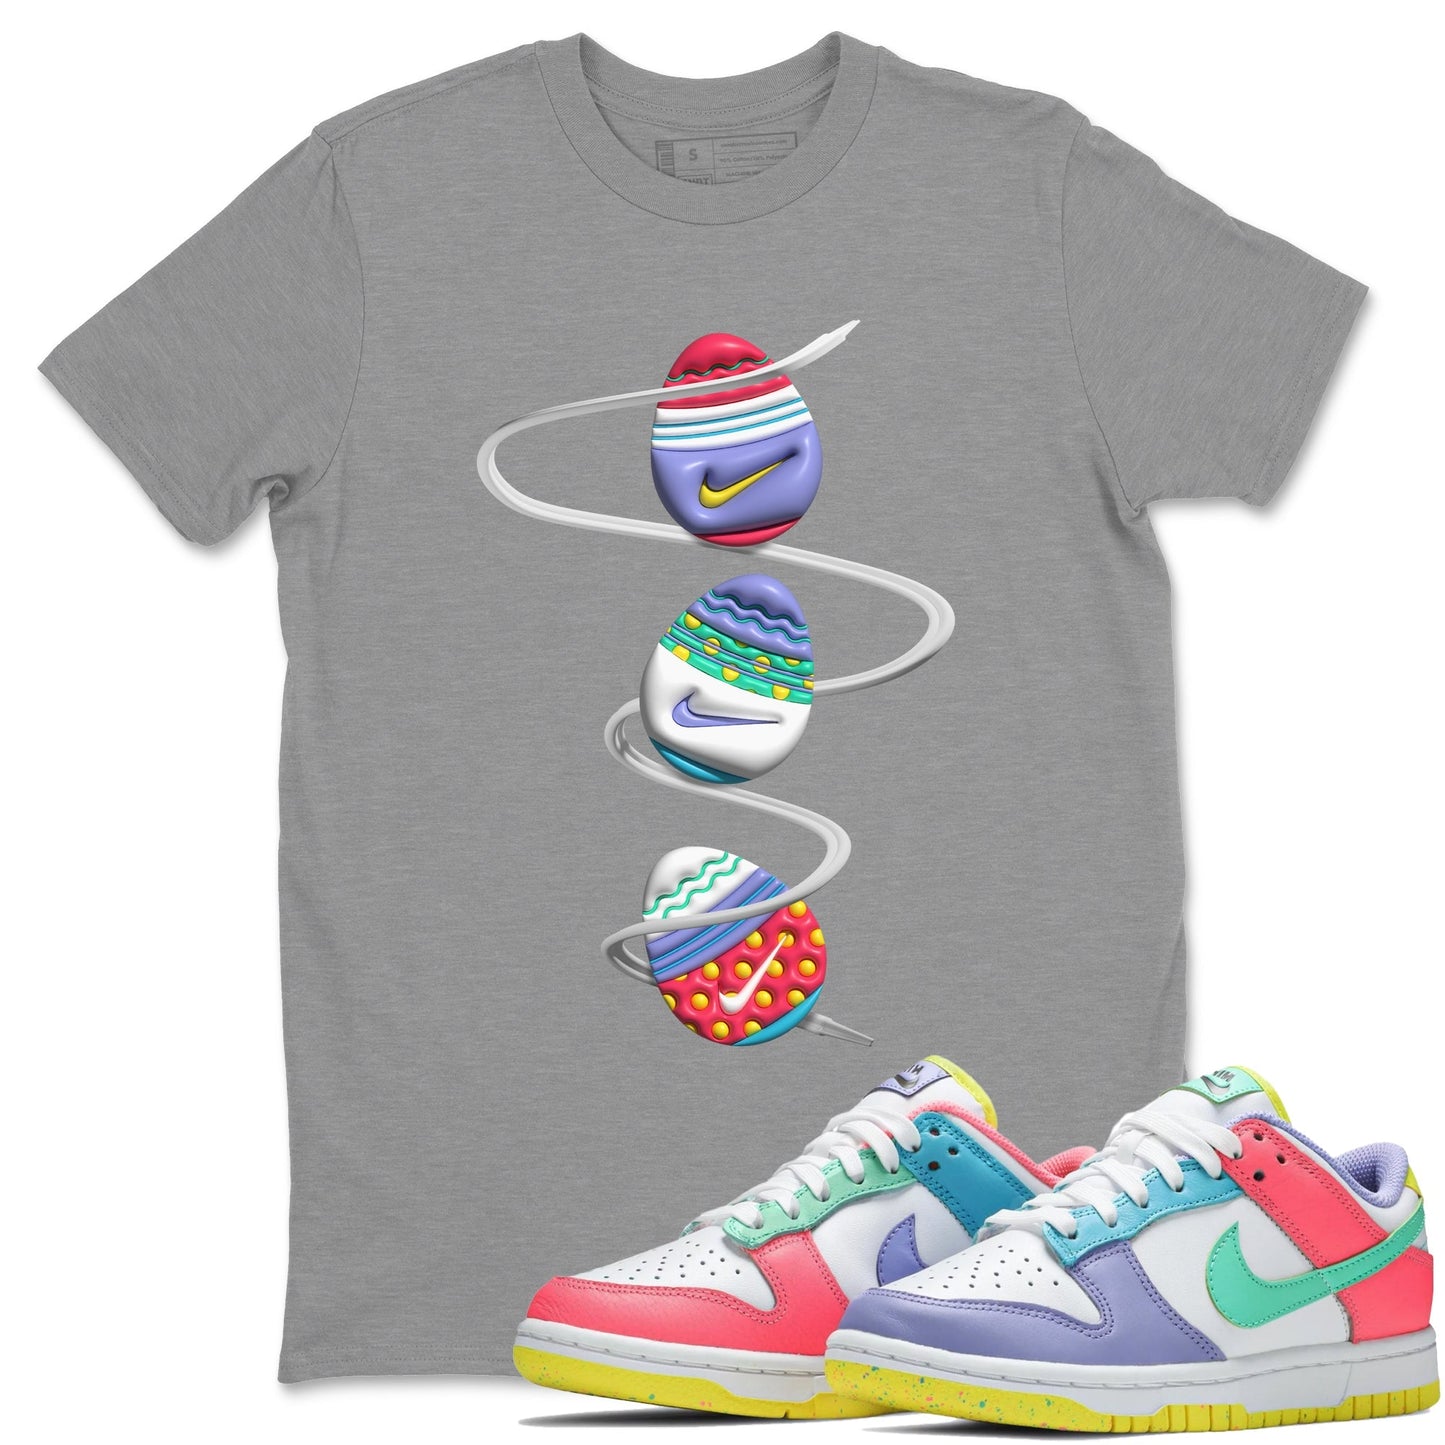 Dunk Easter Candy Sneaker Tees Drip Gear Zone 3D Easter Eggs Sneaker Tees Nike Easter Shirt Unisex Shirts Heather Grey 1